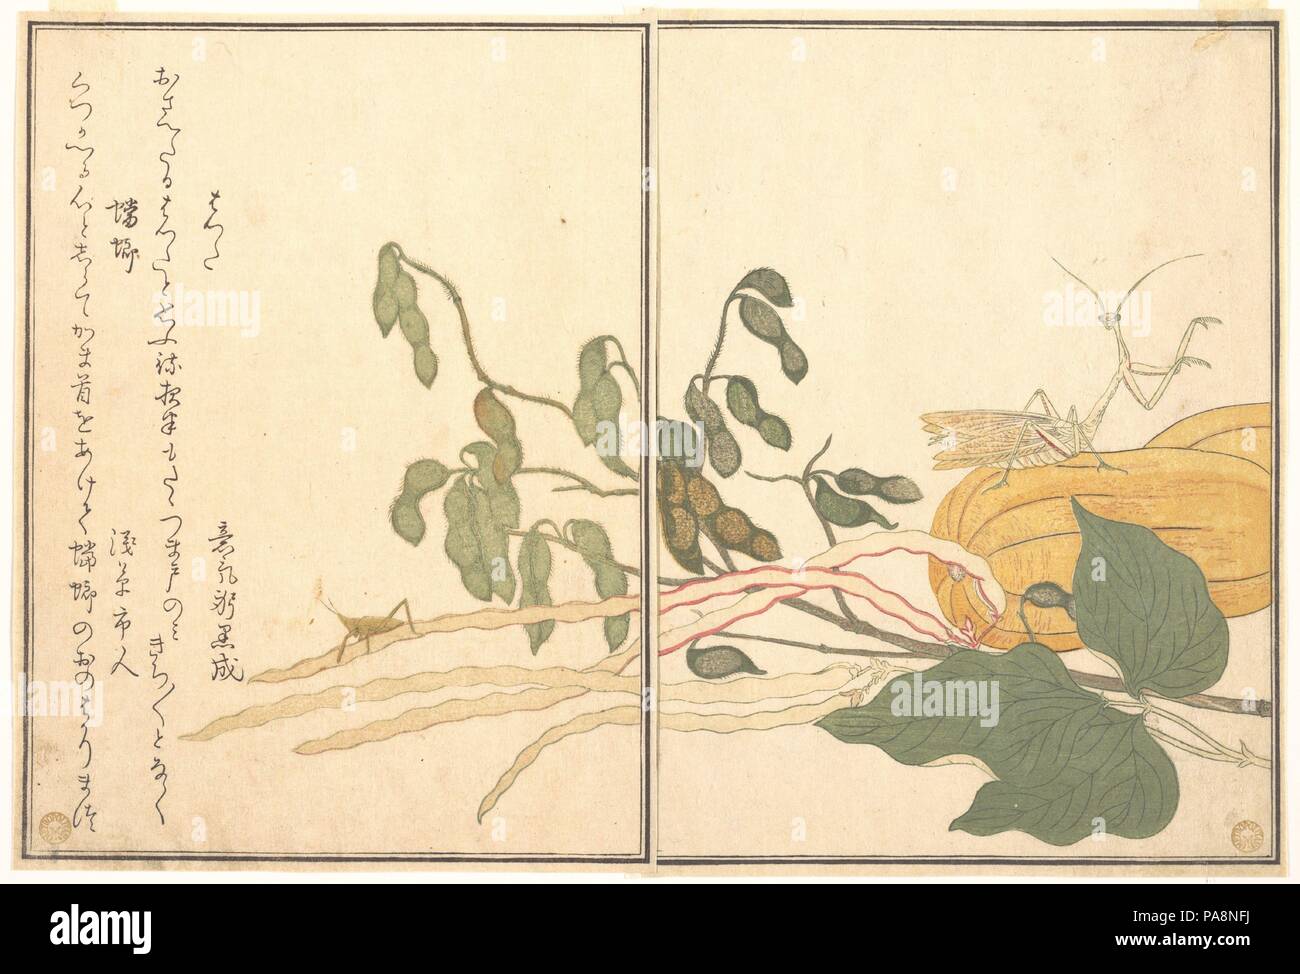 Cone-headed Grasshopper or Locust, (batta); Praying Mantis (Toro or Kamakiri), from the Picture Book of Crawling Creatures (Ehon mushi erami). Artist: Kitagawa Utamaro (Japanese, ca. 1754-1806). Culture: Japan. Dimensions: 10 1/2 x 7 7/32 in. (26.7 x 18.4 cm). Date: 1788.  Ehon mushi erami (Picture Book of Crawling Creatures) is illustrated with fifteen designs of insects and other garden creatures by Utamaro. Published by Tsutaya Juzaburo , the poems were selected and introduced by a preface written by the poet and scholar Yadoya no Meshimori (Rokujuen; 1753-1830), who later became head of th Stock Photo